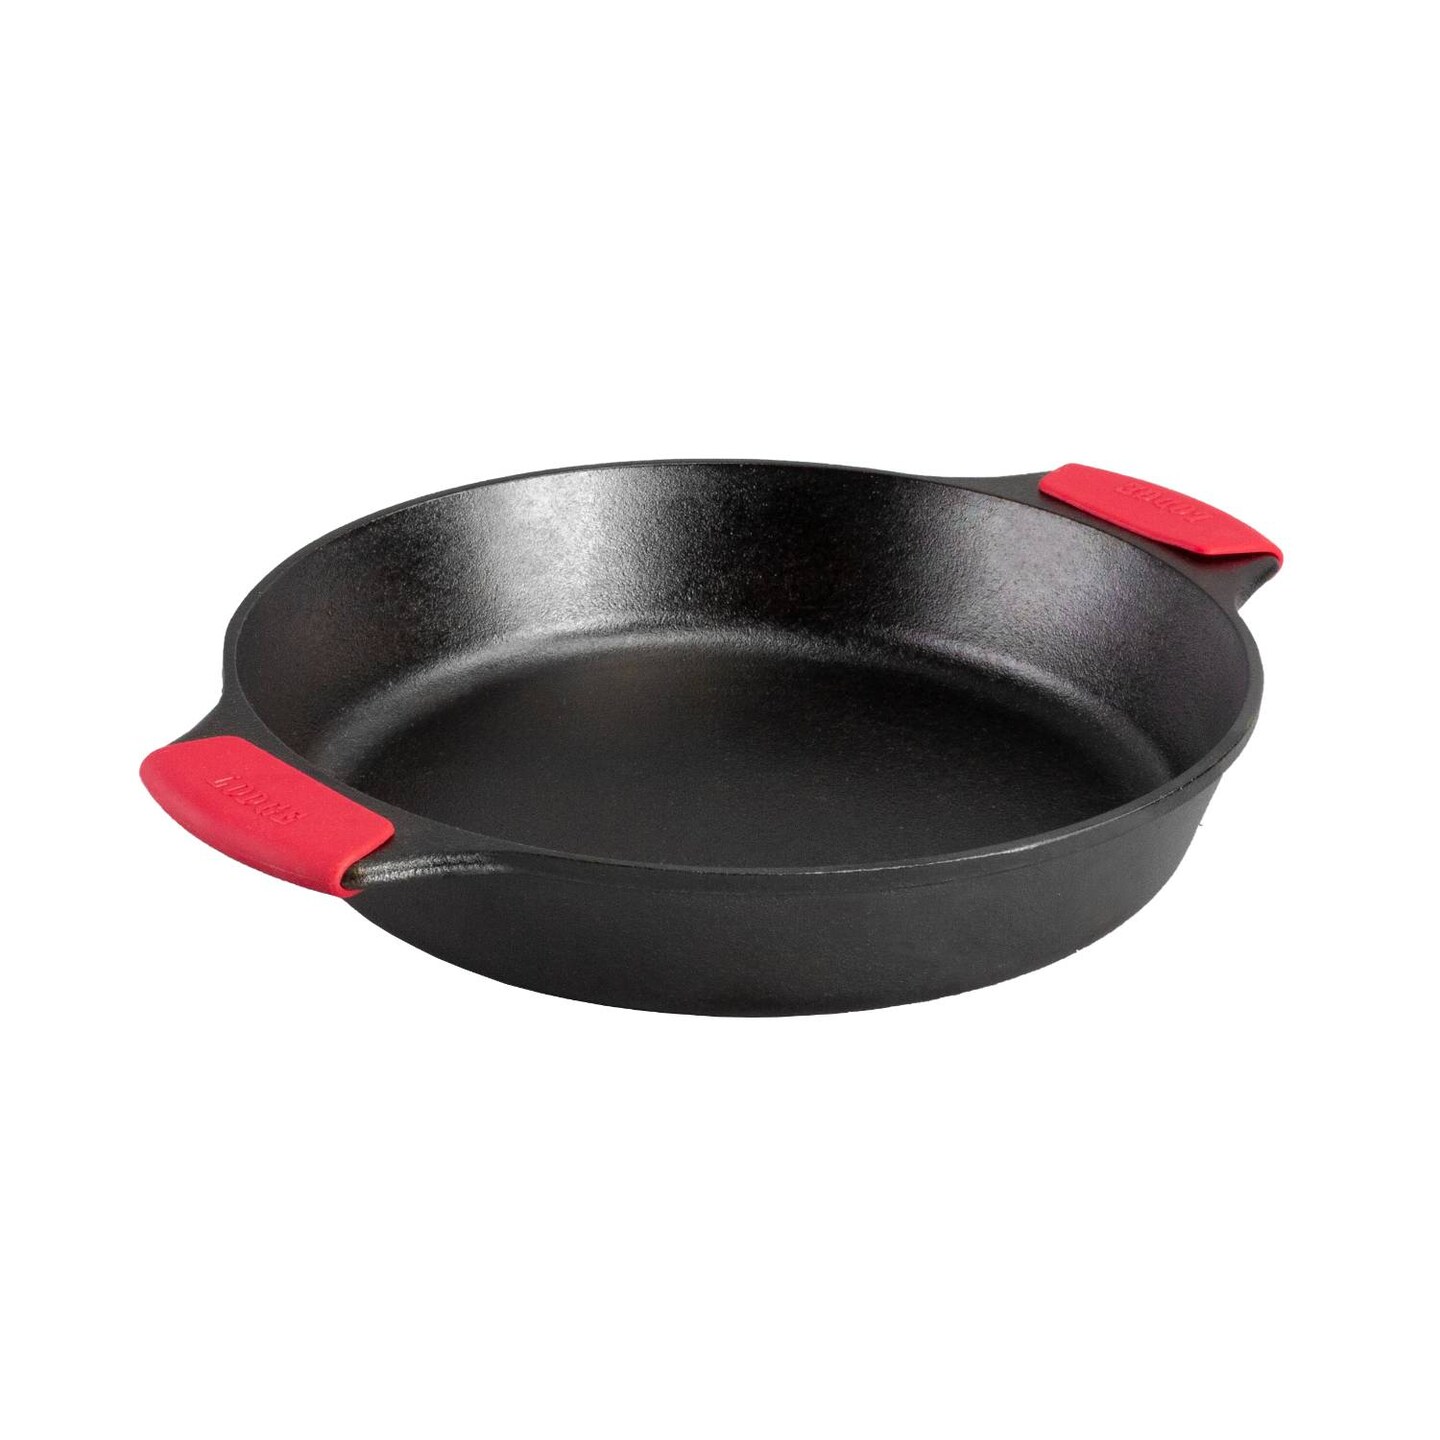  Lodge Cast Iron Skillet with Red Silicone Hot Handle Holder,  10.25-inch: Home & Kitchen